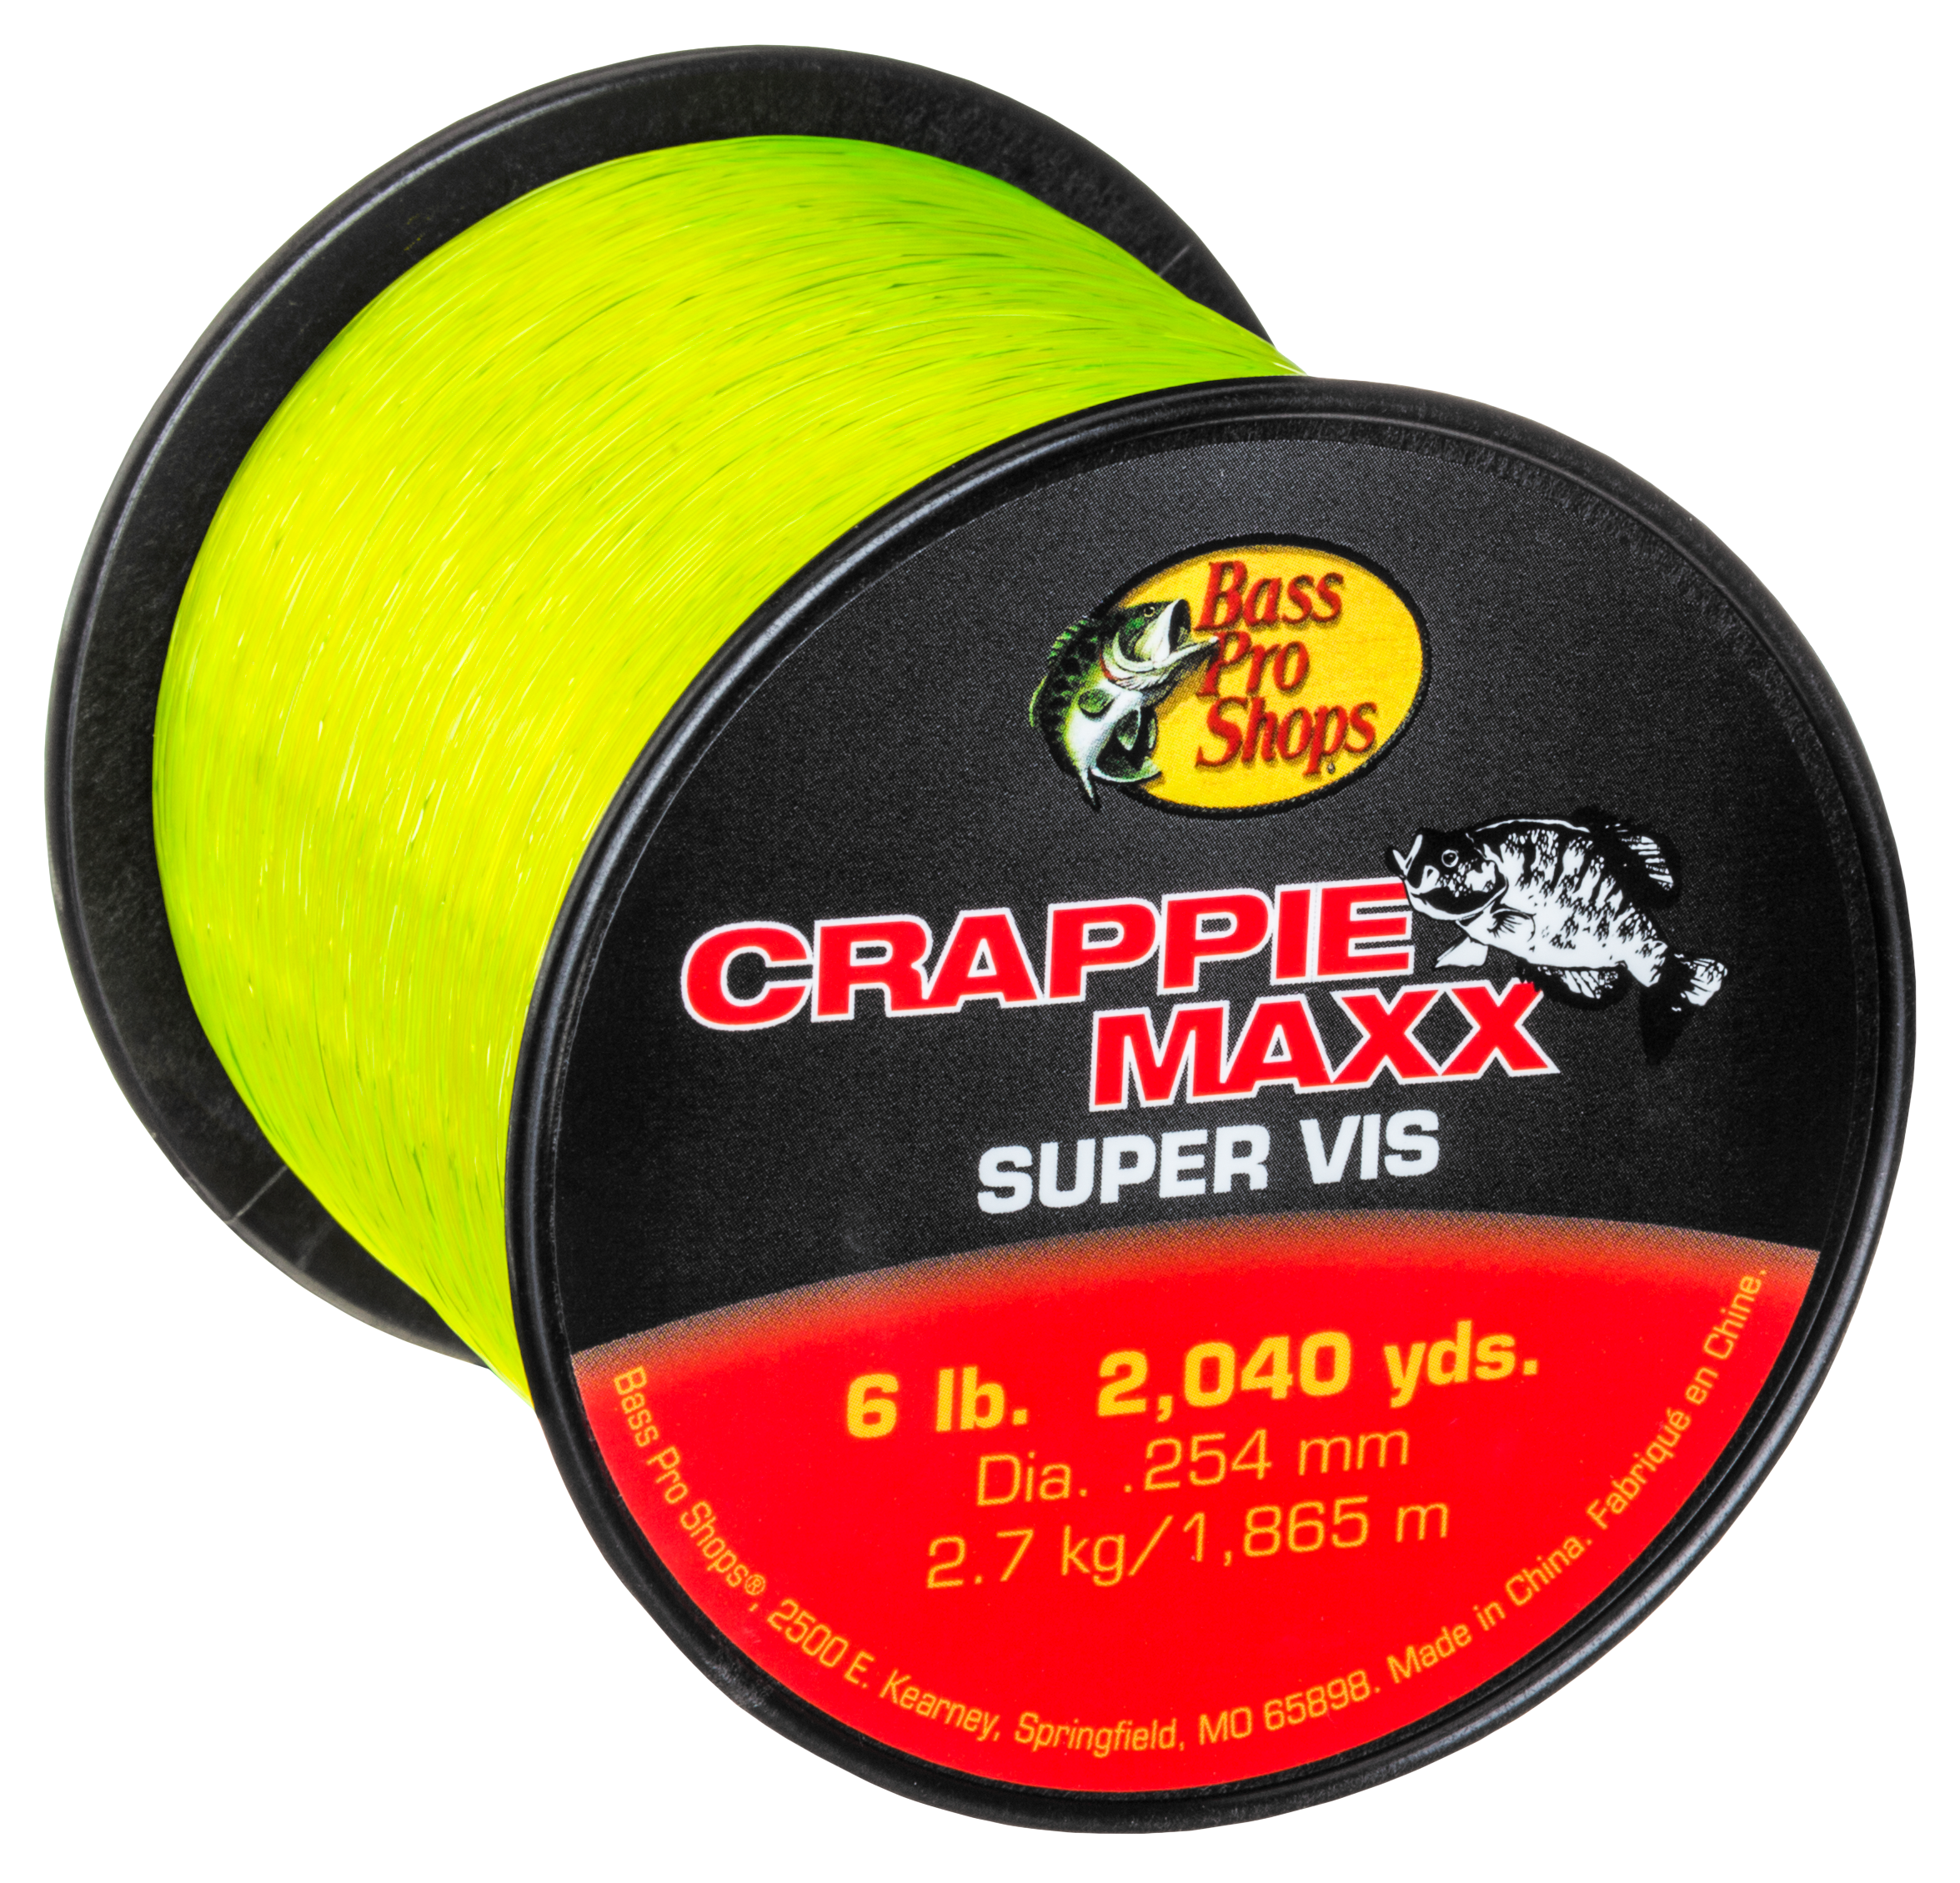 mr crappie fishing line, mr crappie fishing line Suppliers and